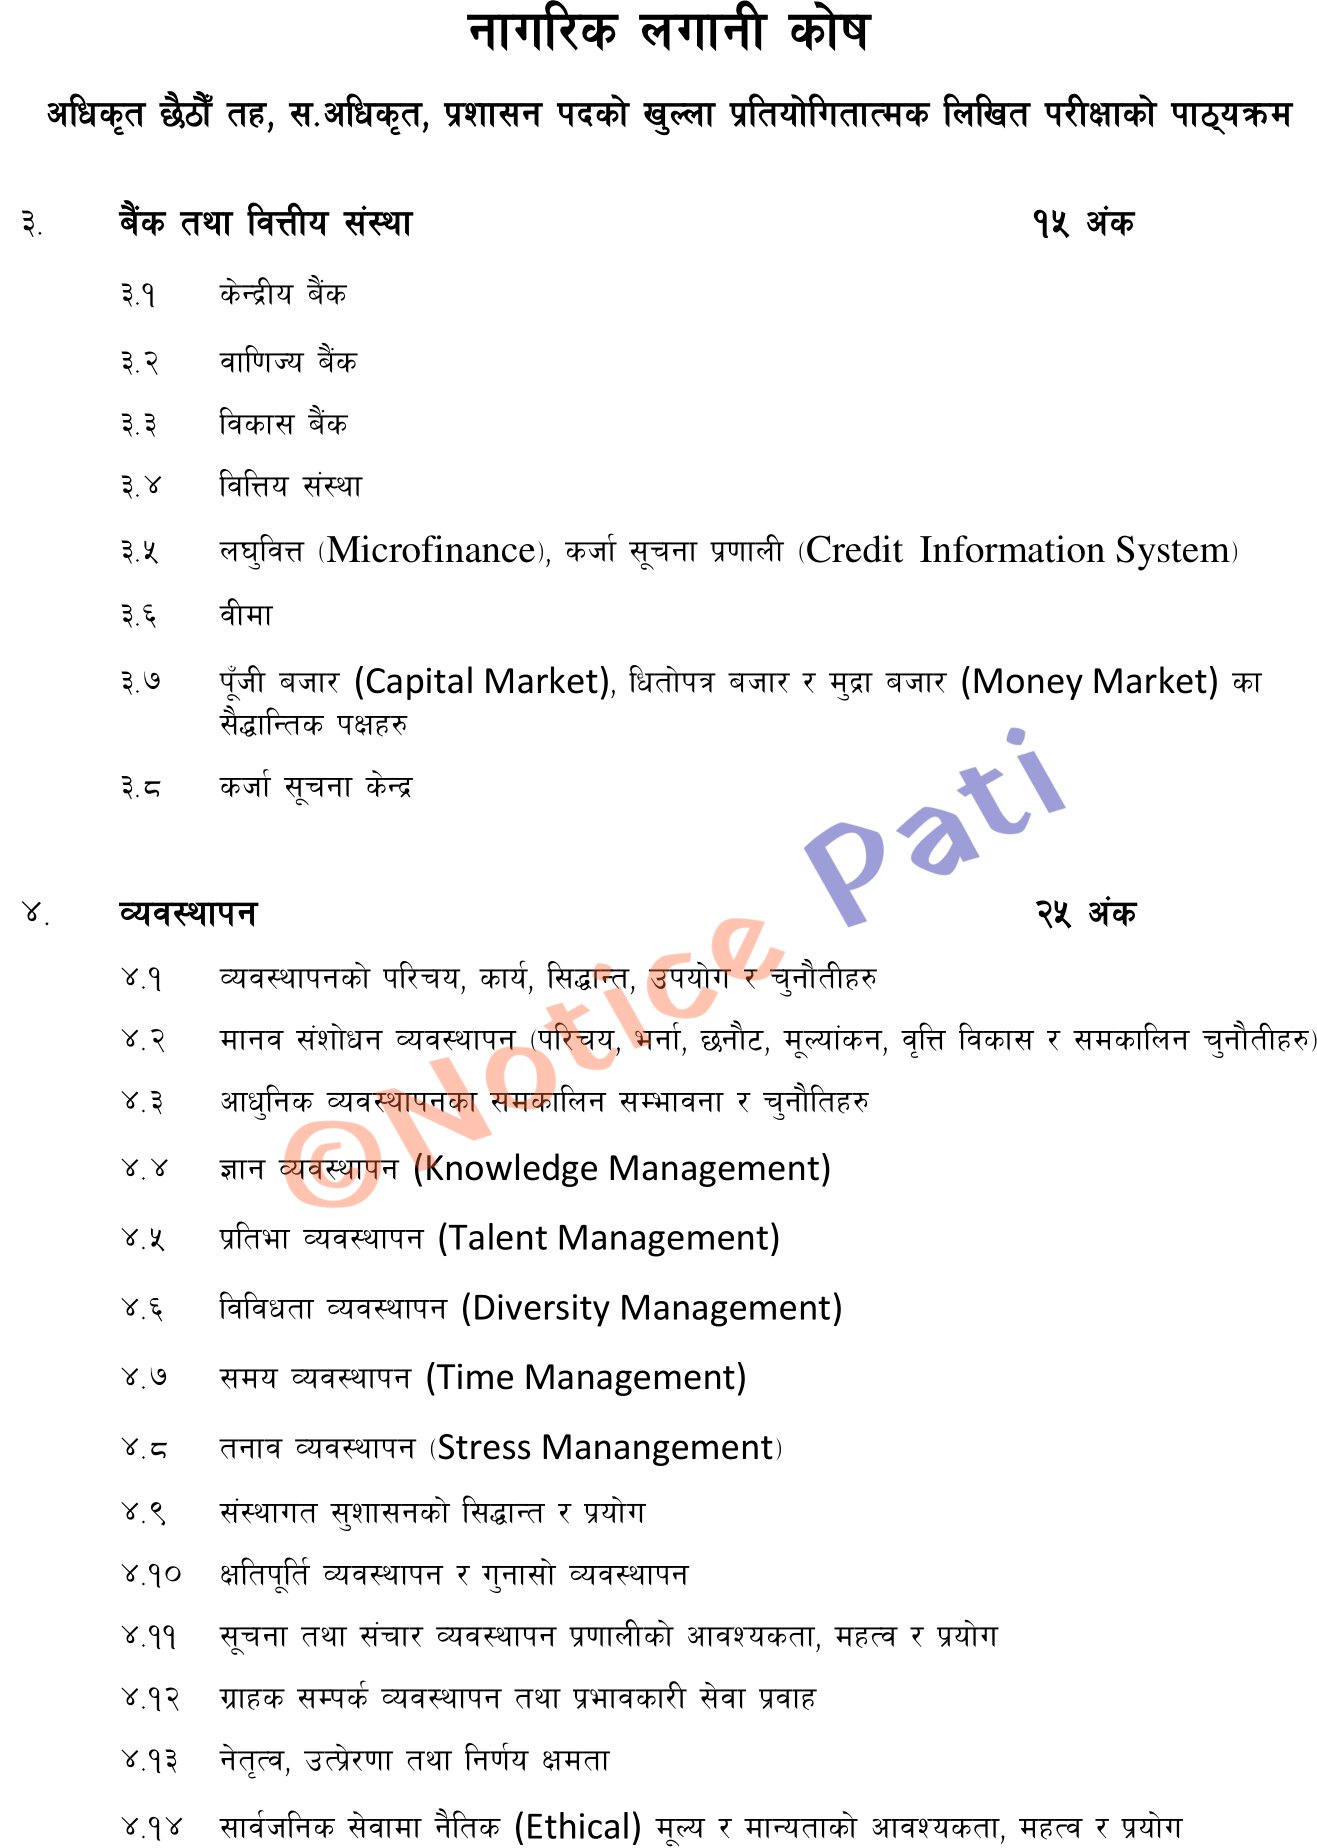 In this post we will post Citizen Investment Trust (Nagarik Lagani Kosh) Assistant Officer Administration Exam Syllabus.